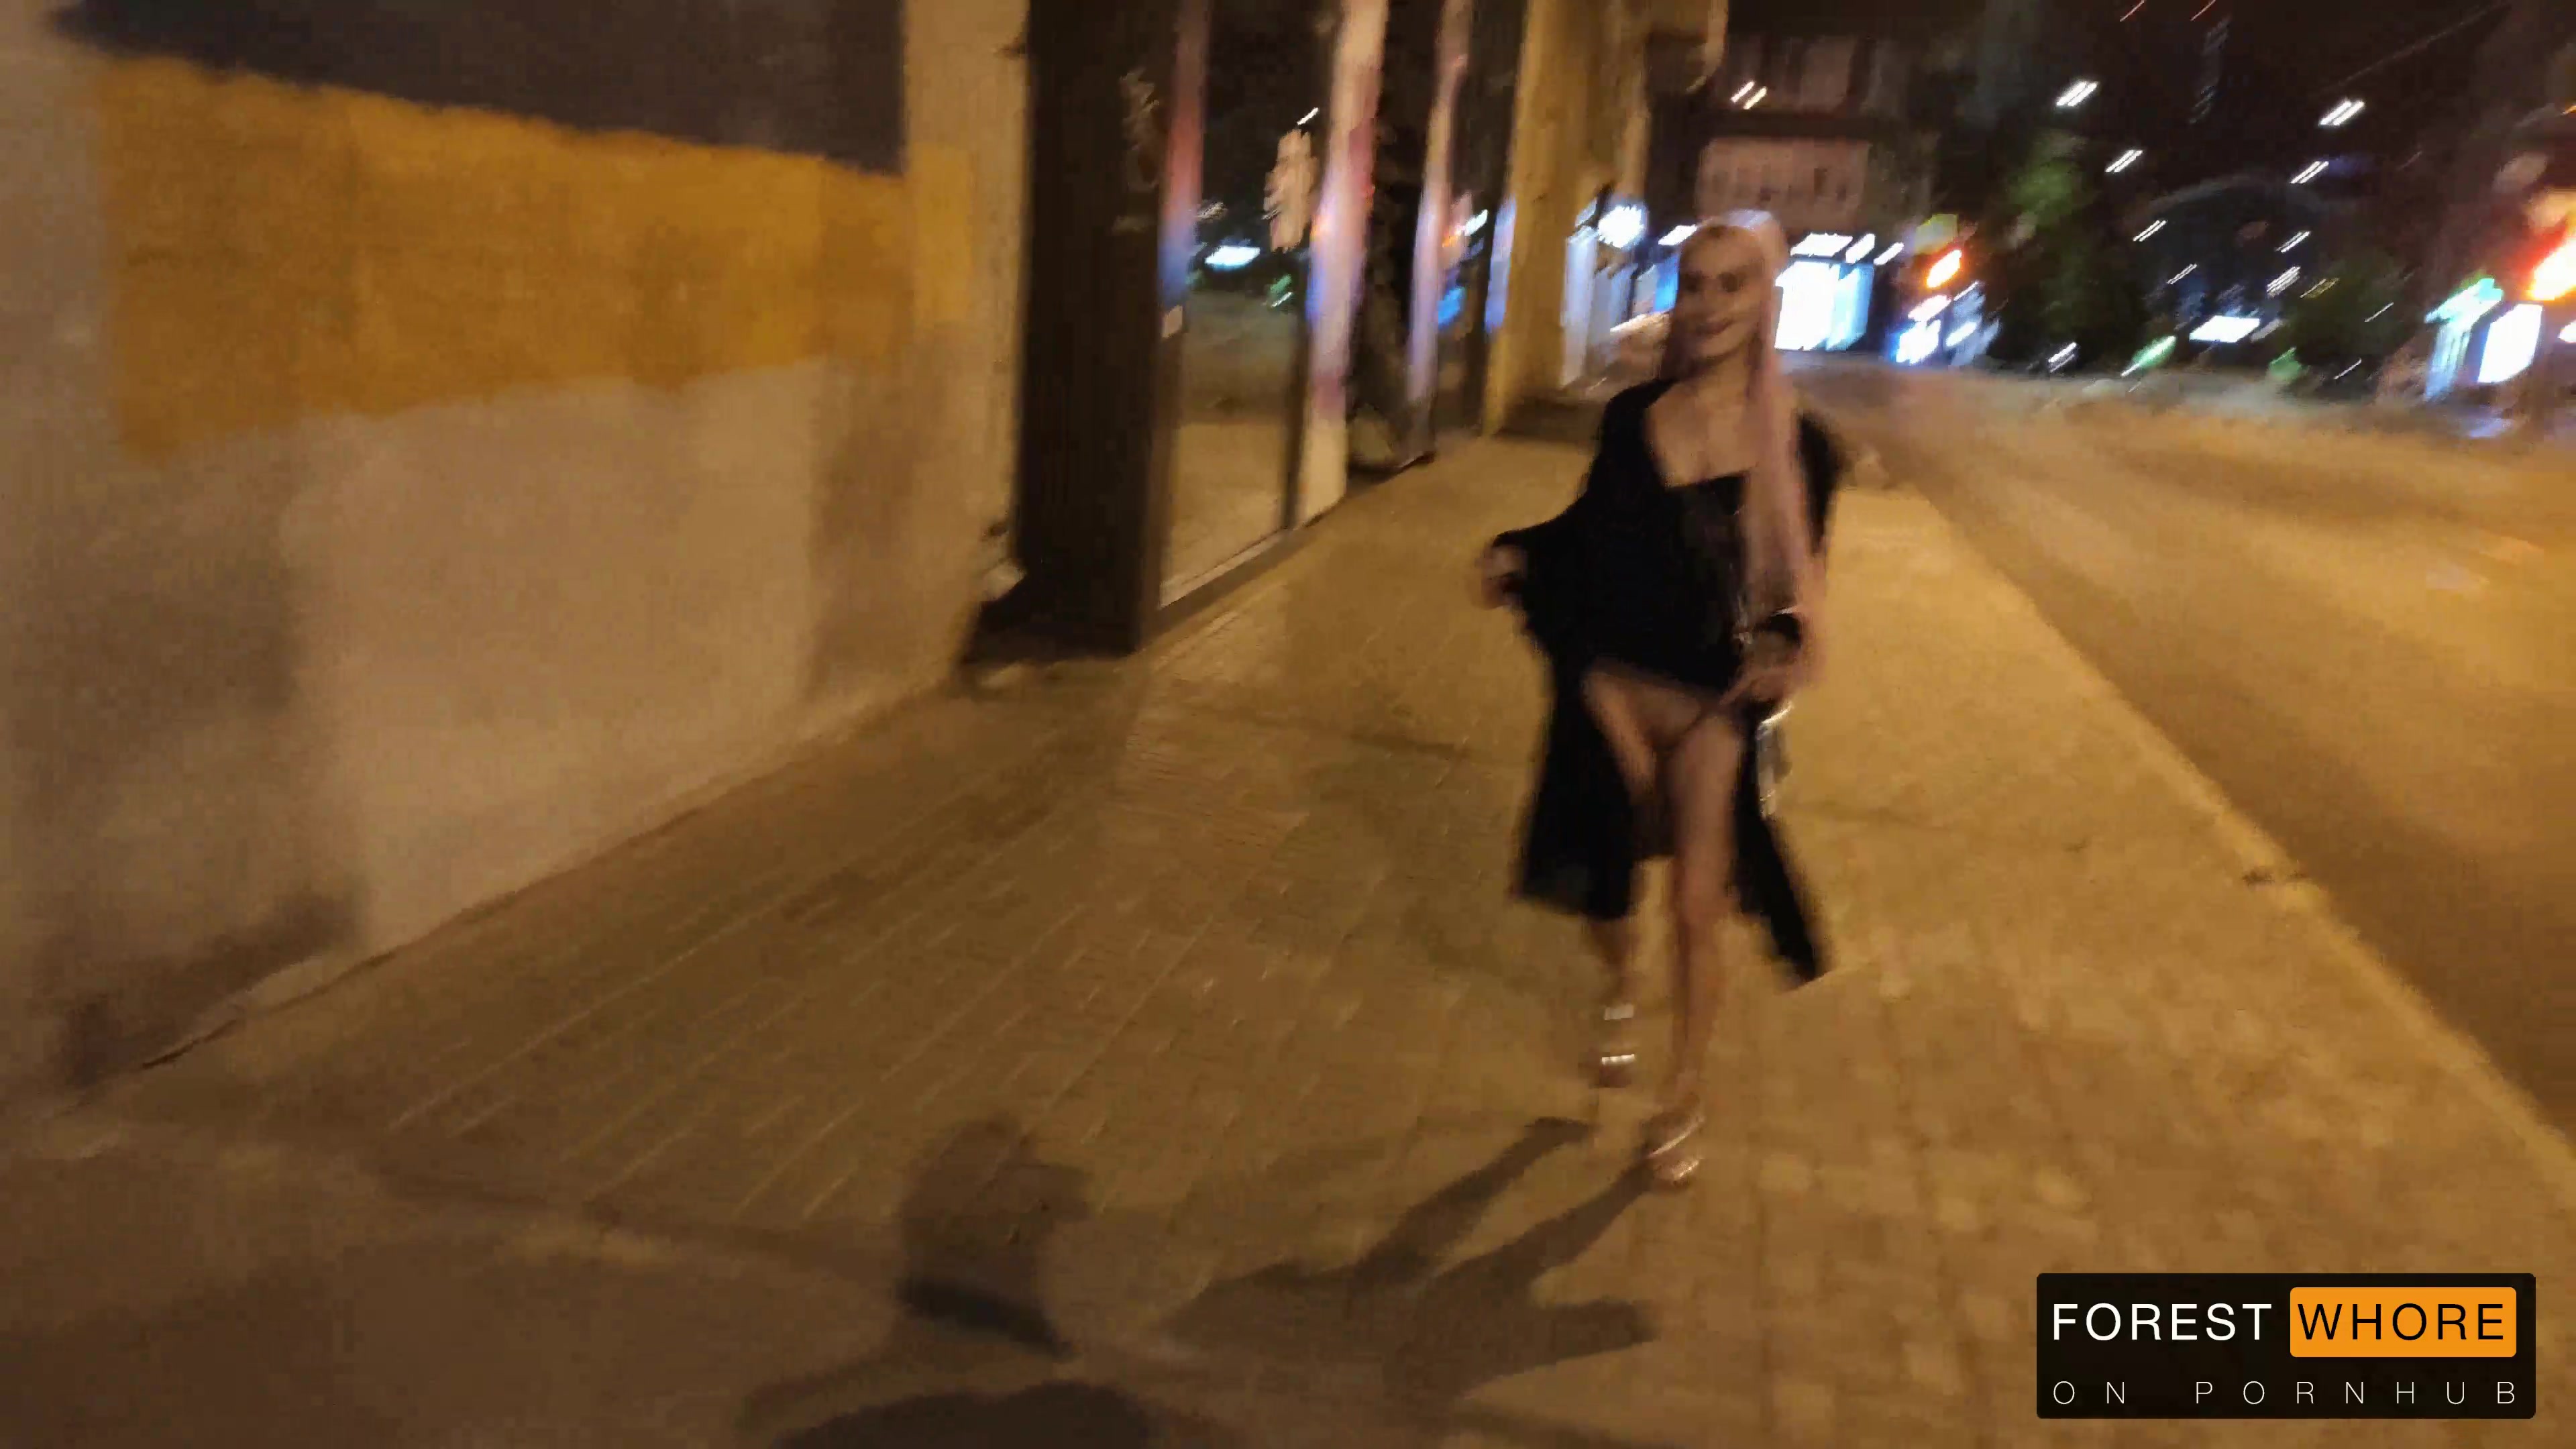 Forest Whore – Night naked walk, licking public toilet and public fetishes